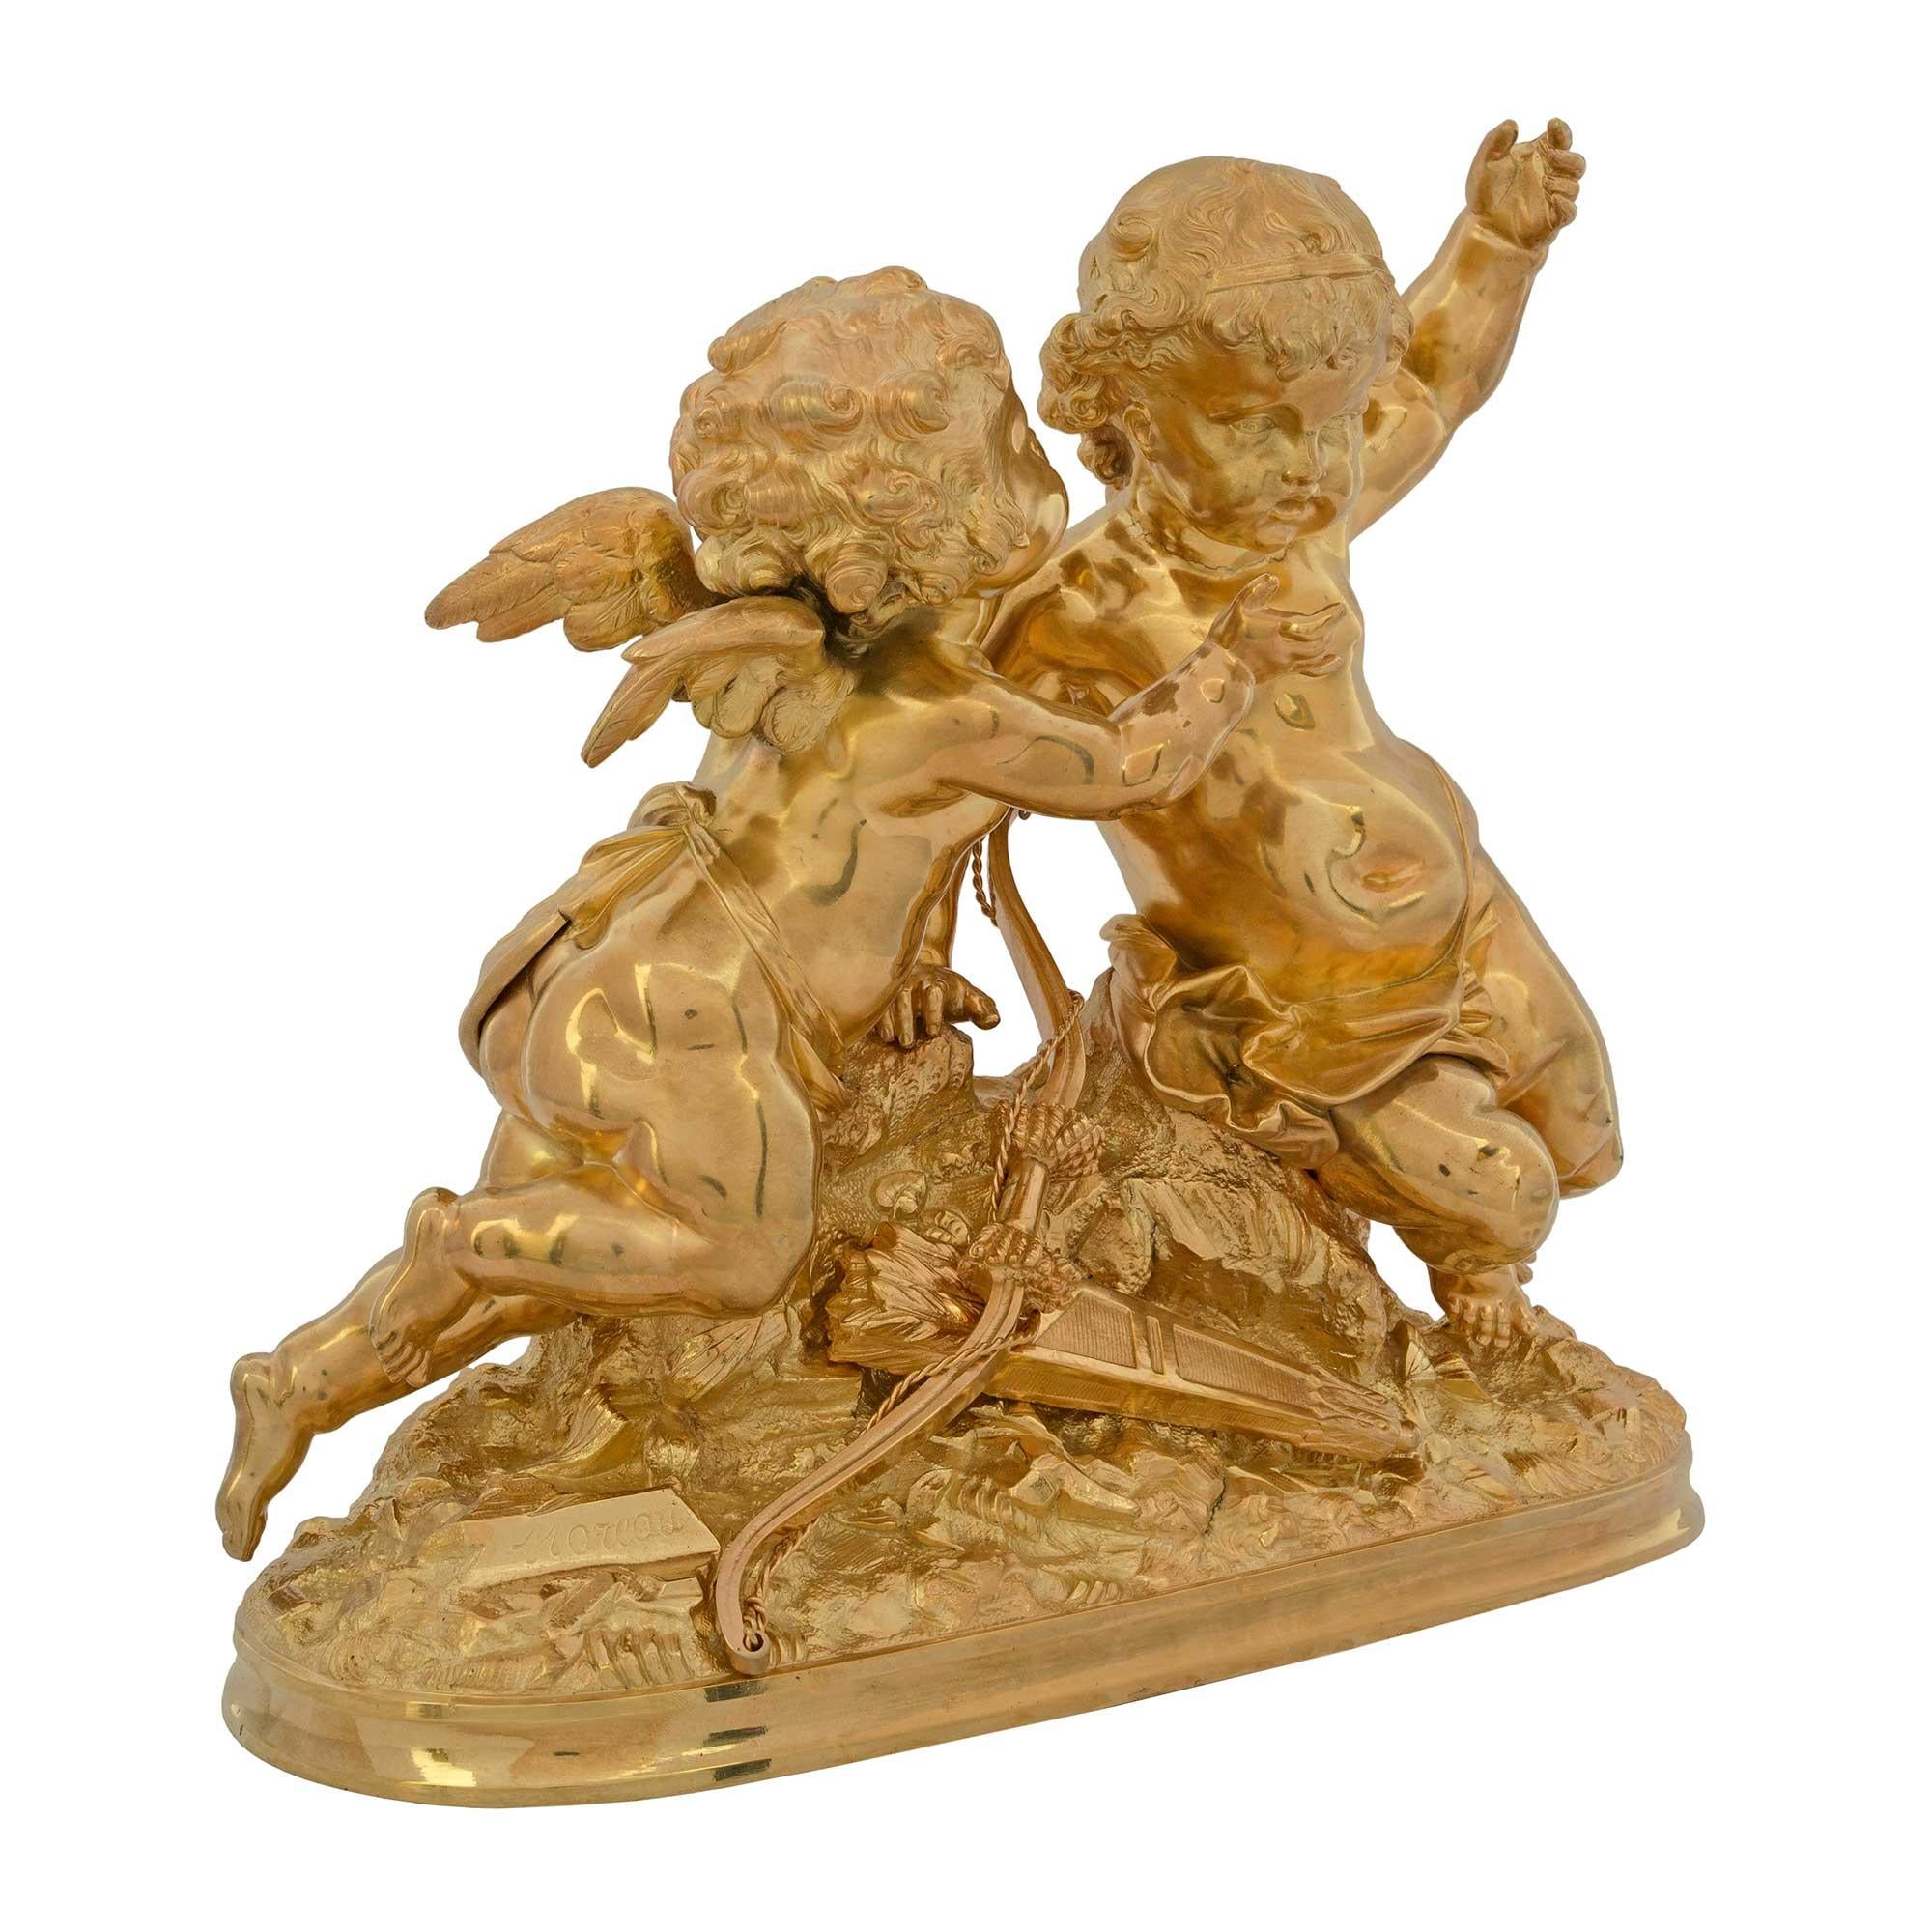 A charming French 19th century Louis XVI st. ormolu statue of two cherubs signed Moreau. The two playful winged cherubs are standing amidst a rocky terrain while one is whispering in the ear of the other. The cherubs are above with their bow and